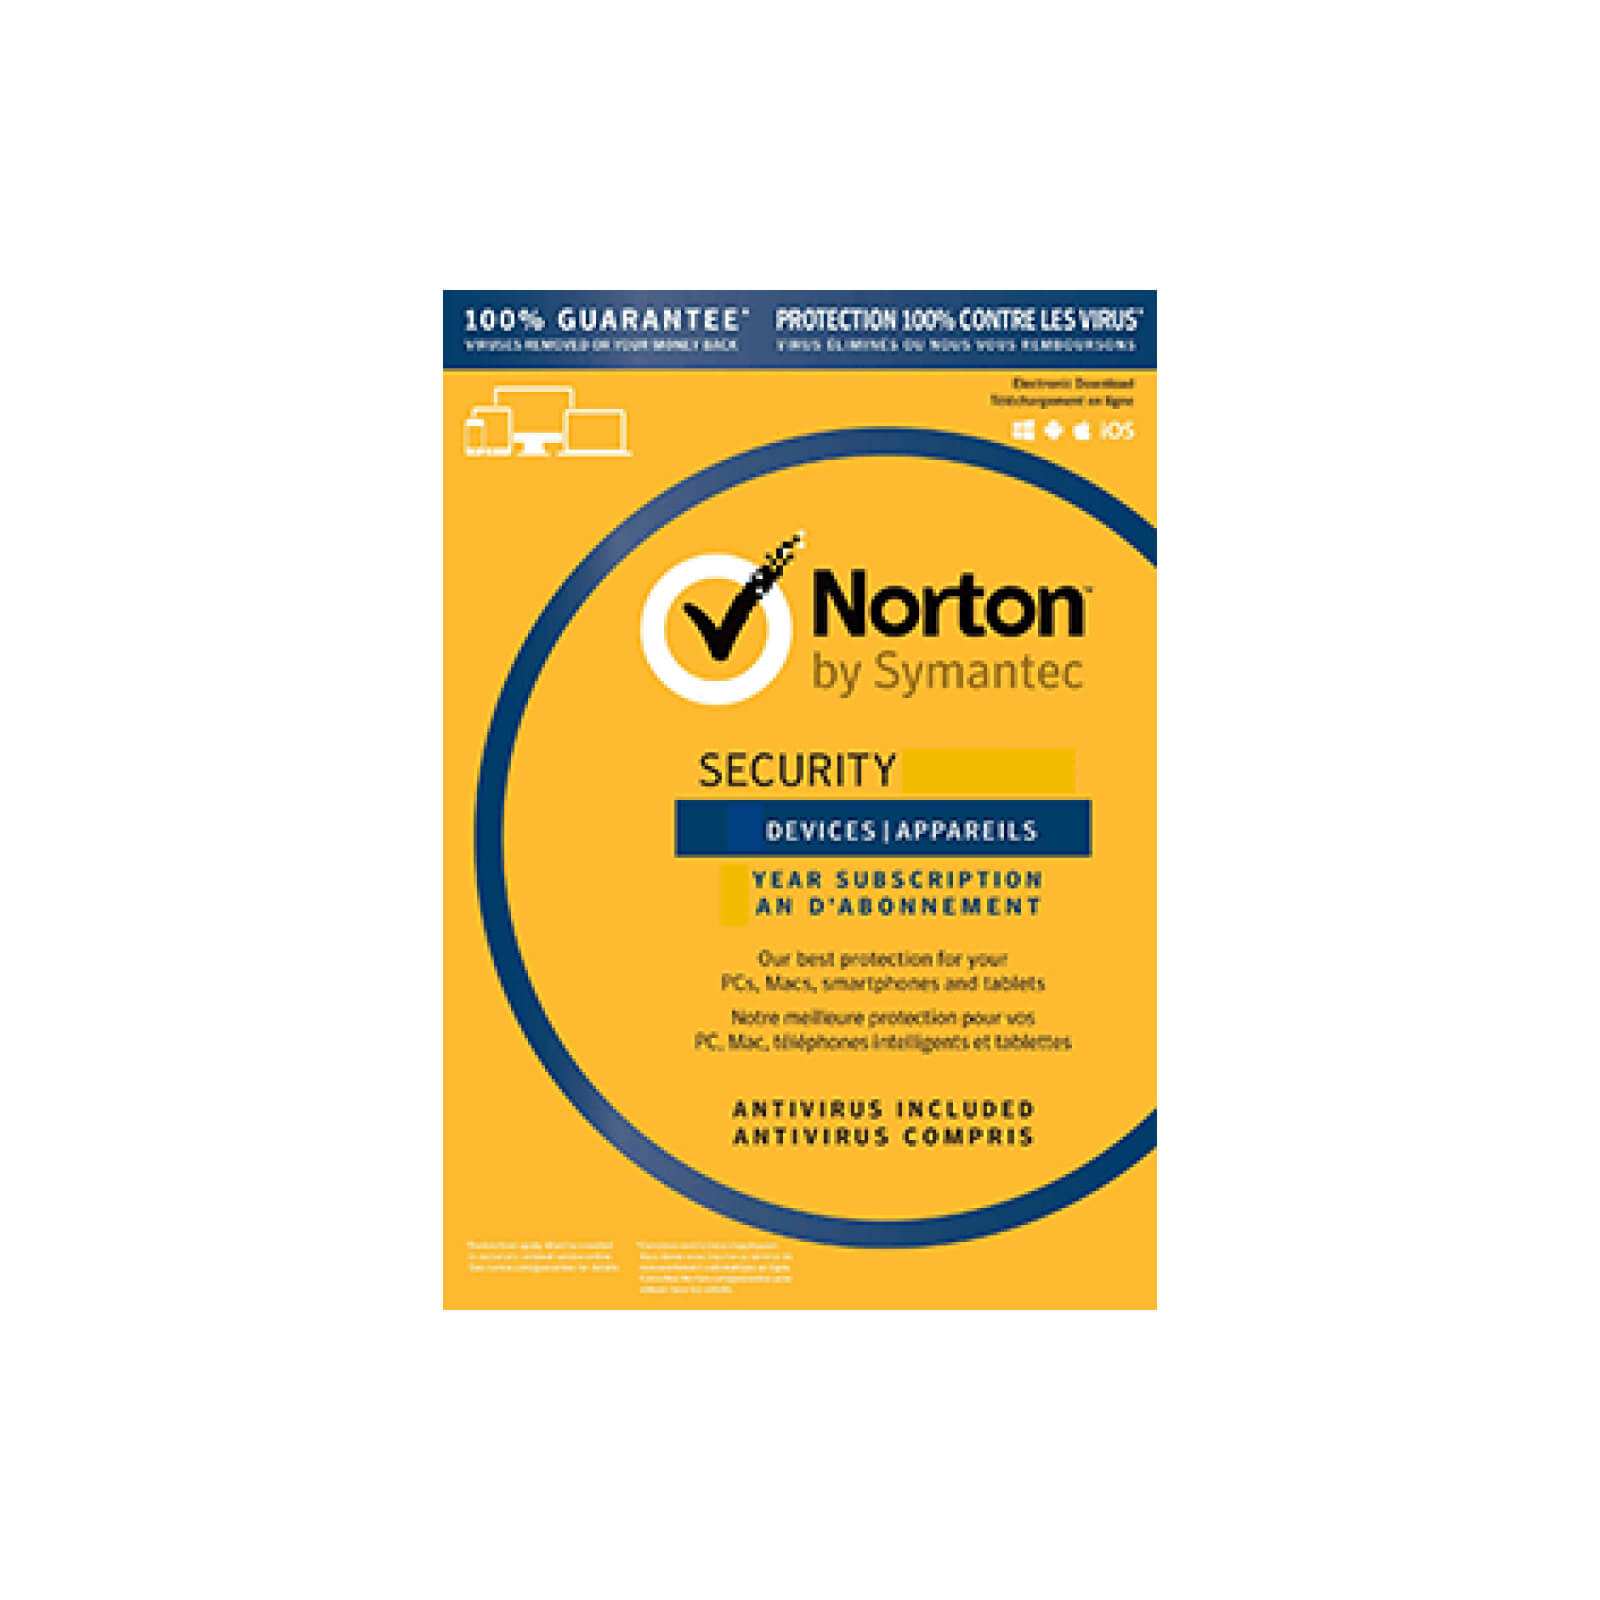 norton internet security 2016 free 90 day trial